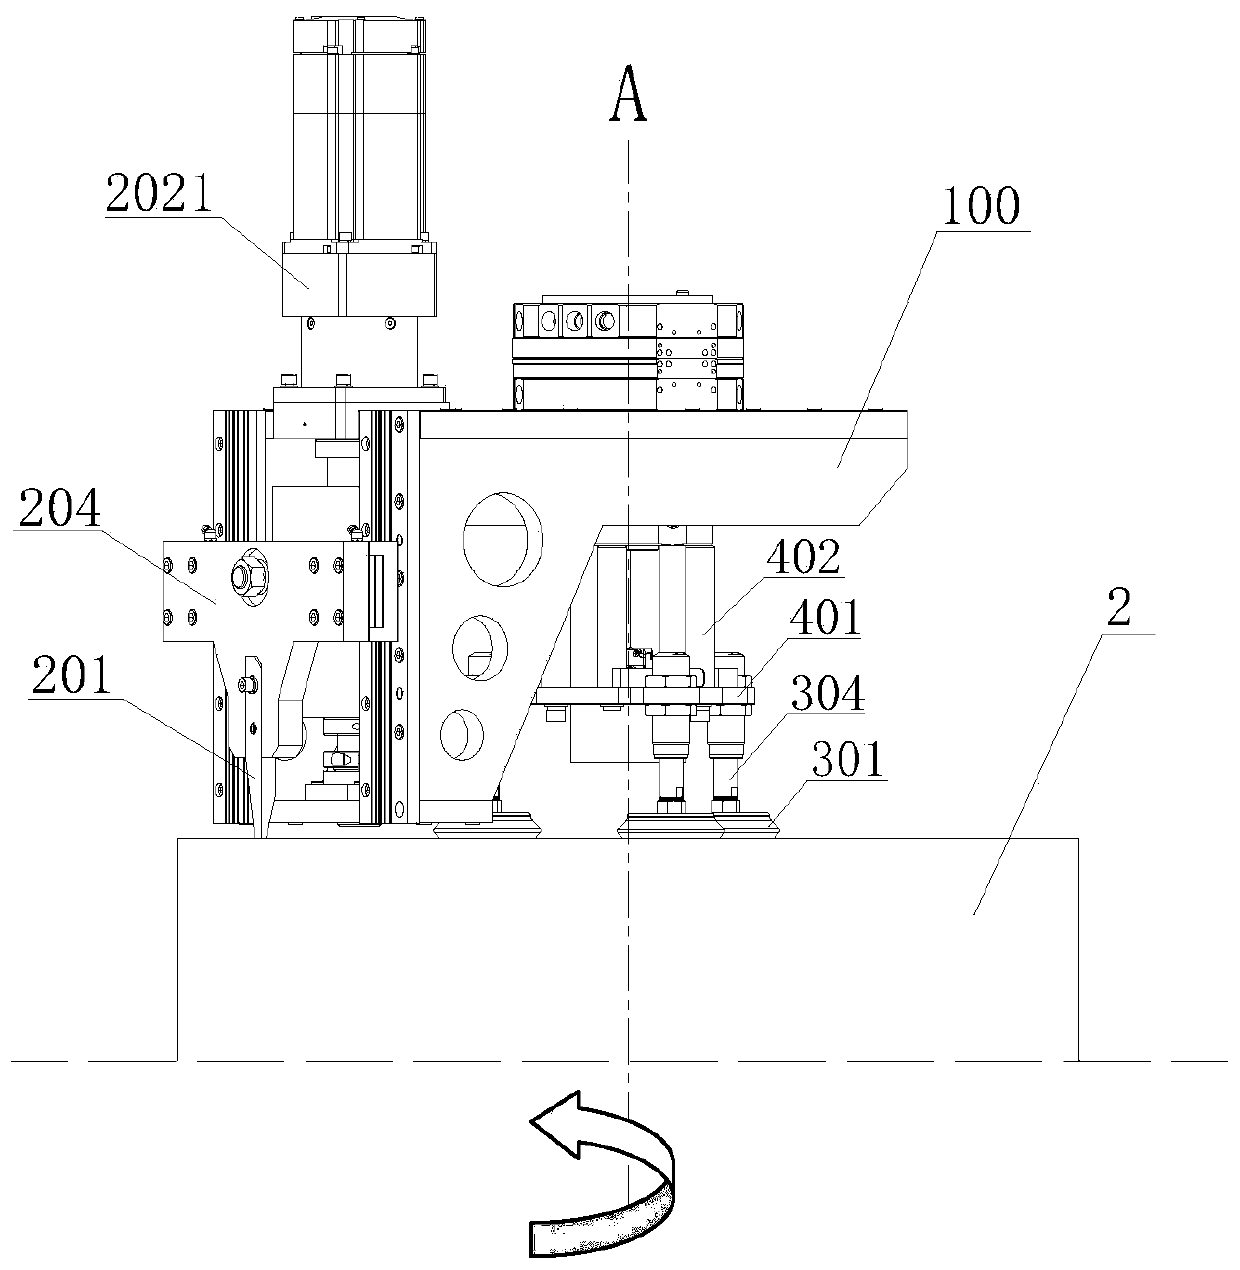 Bucket cover opening and taking device suitable for factory automation